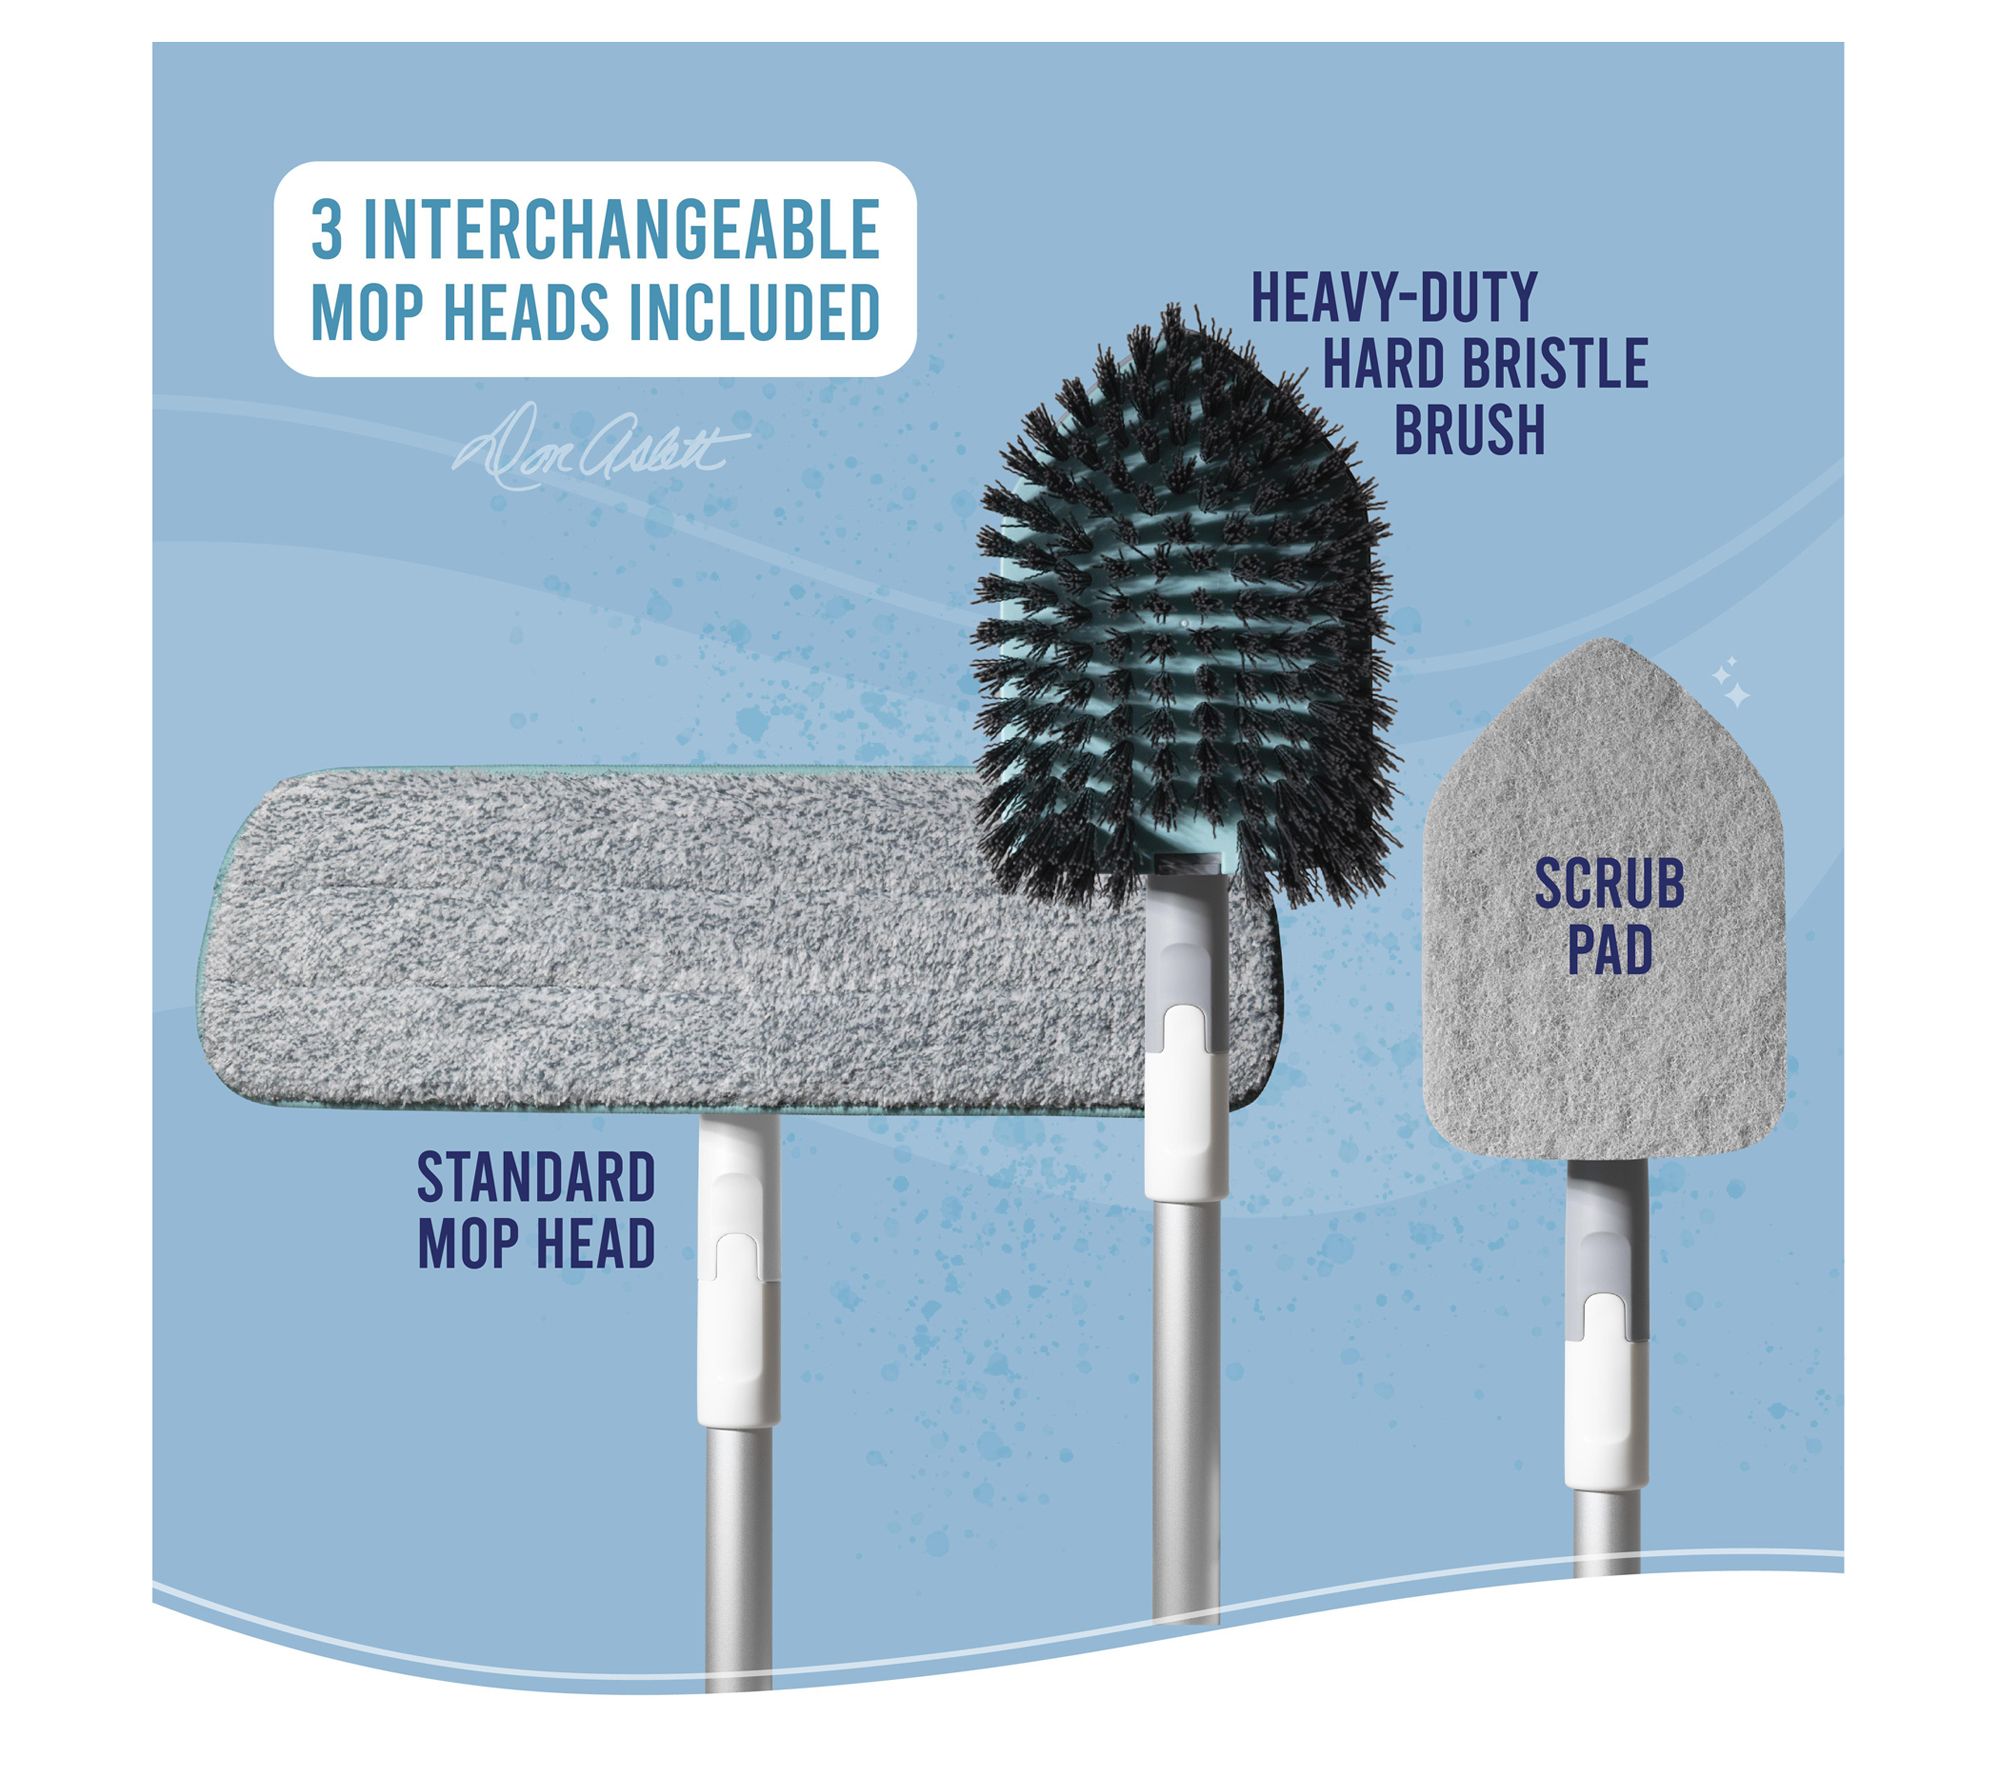 Don Aslett Grout and Tile Brush